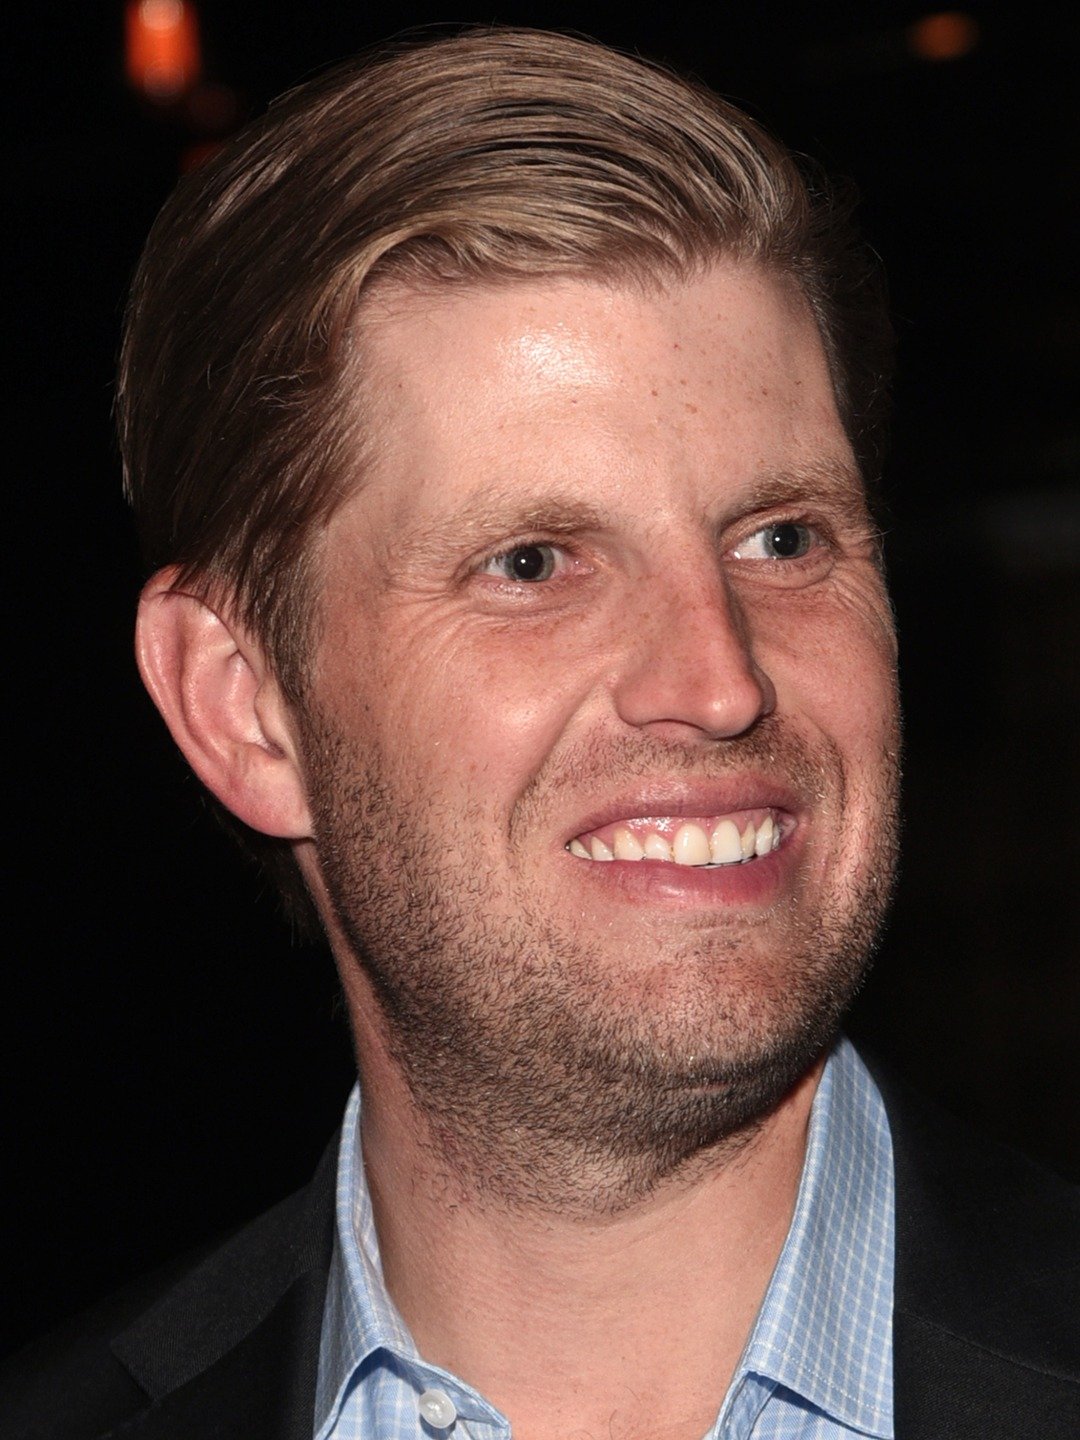 How tall is Eric Trump?